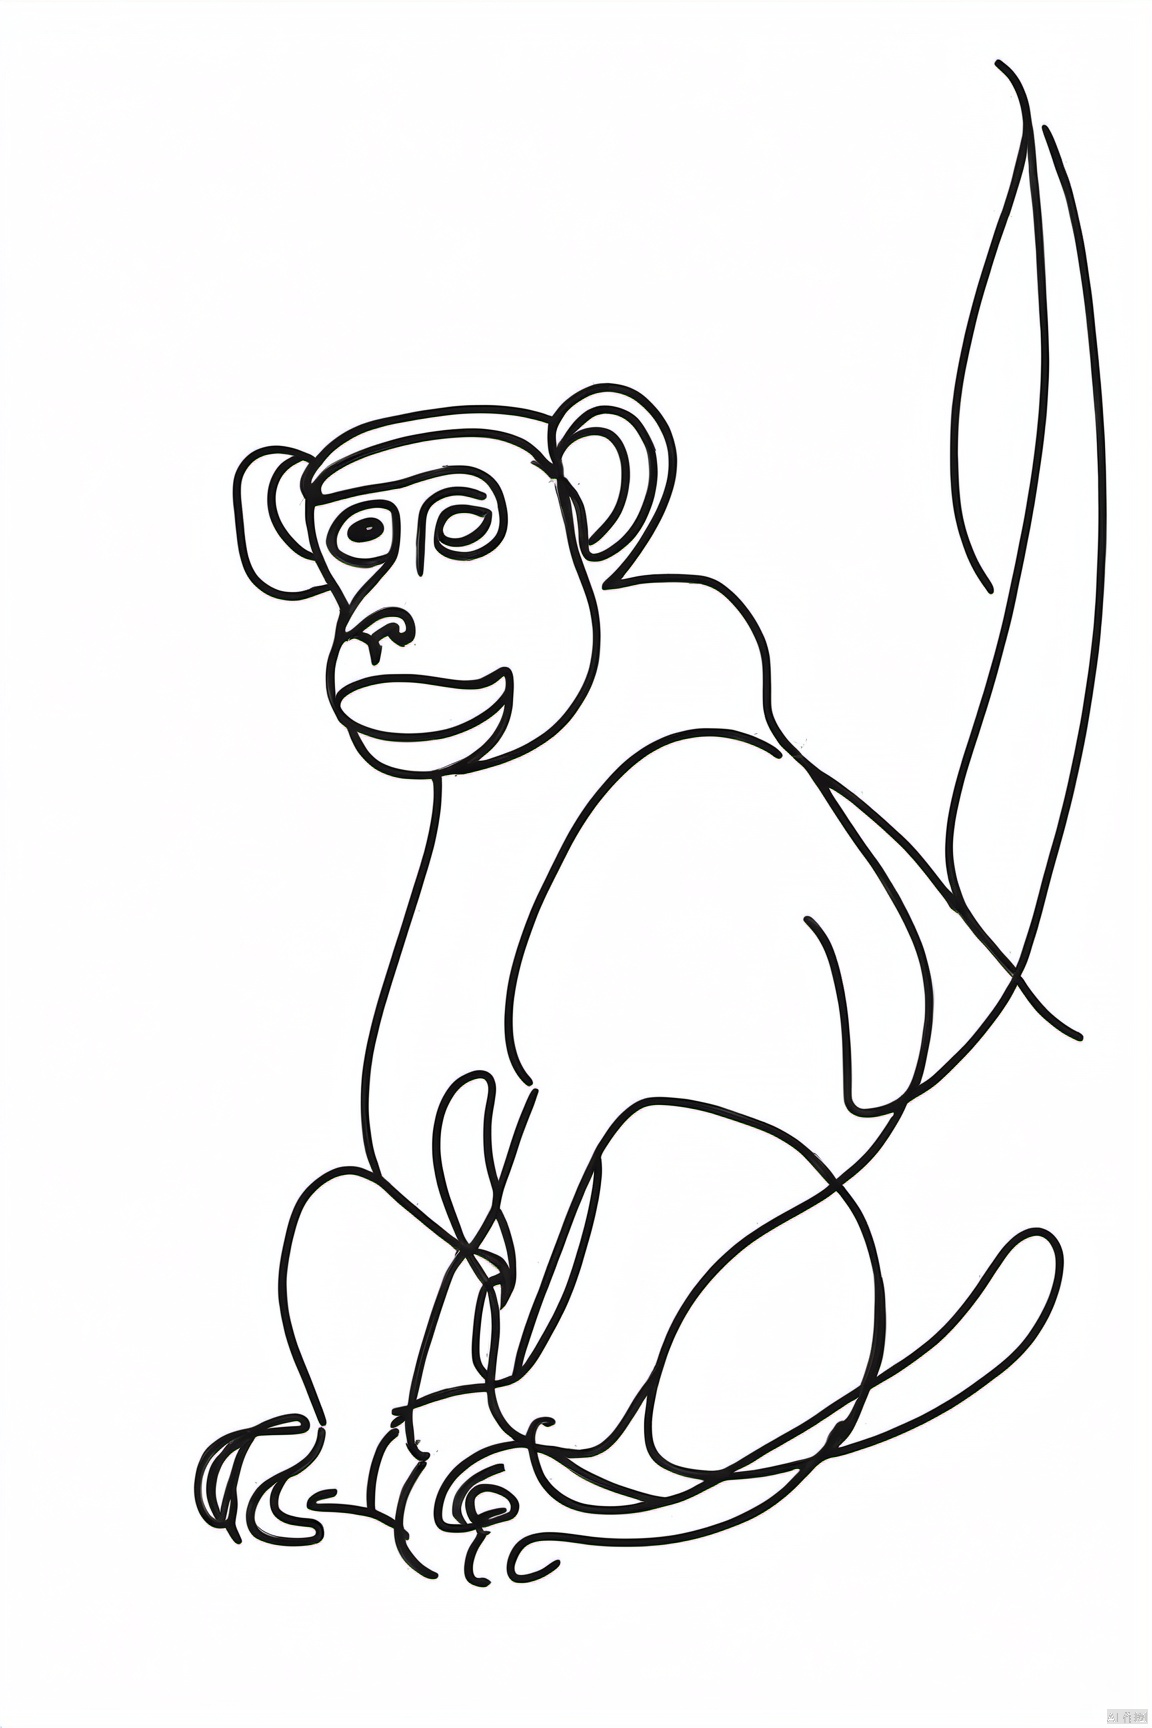  Chinese_zodiac,monkey,Chinese zodiac, simple drawing, One stroke of painting, a line art, black lines, white background, desert_sky